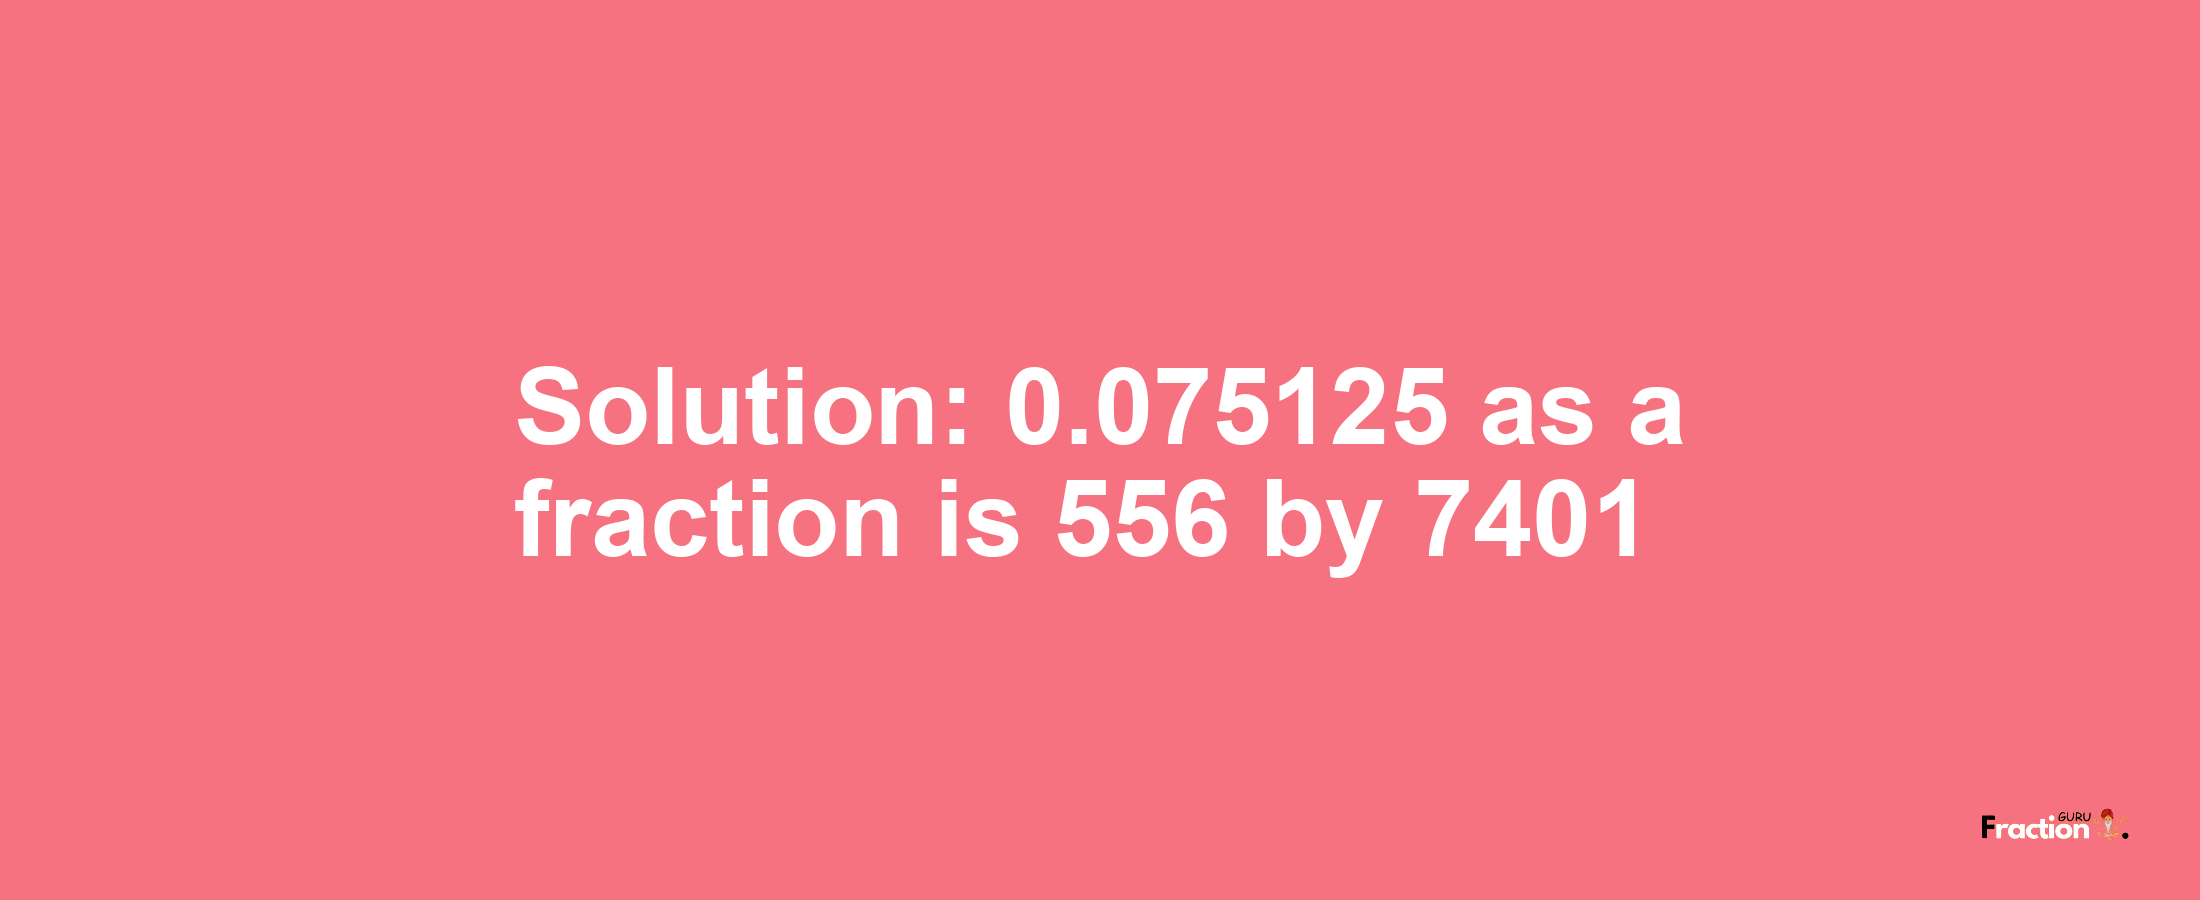 Solution:0.075125 as a fraction is 556/7401